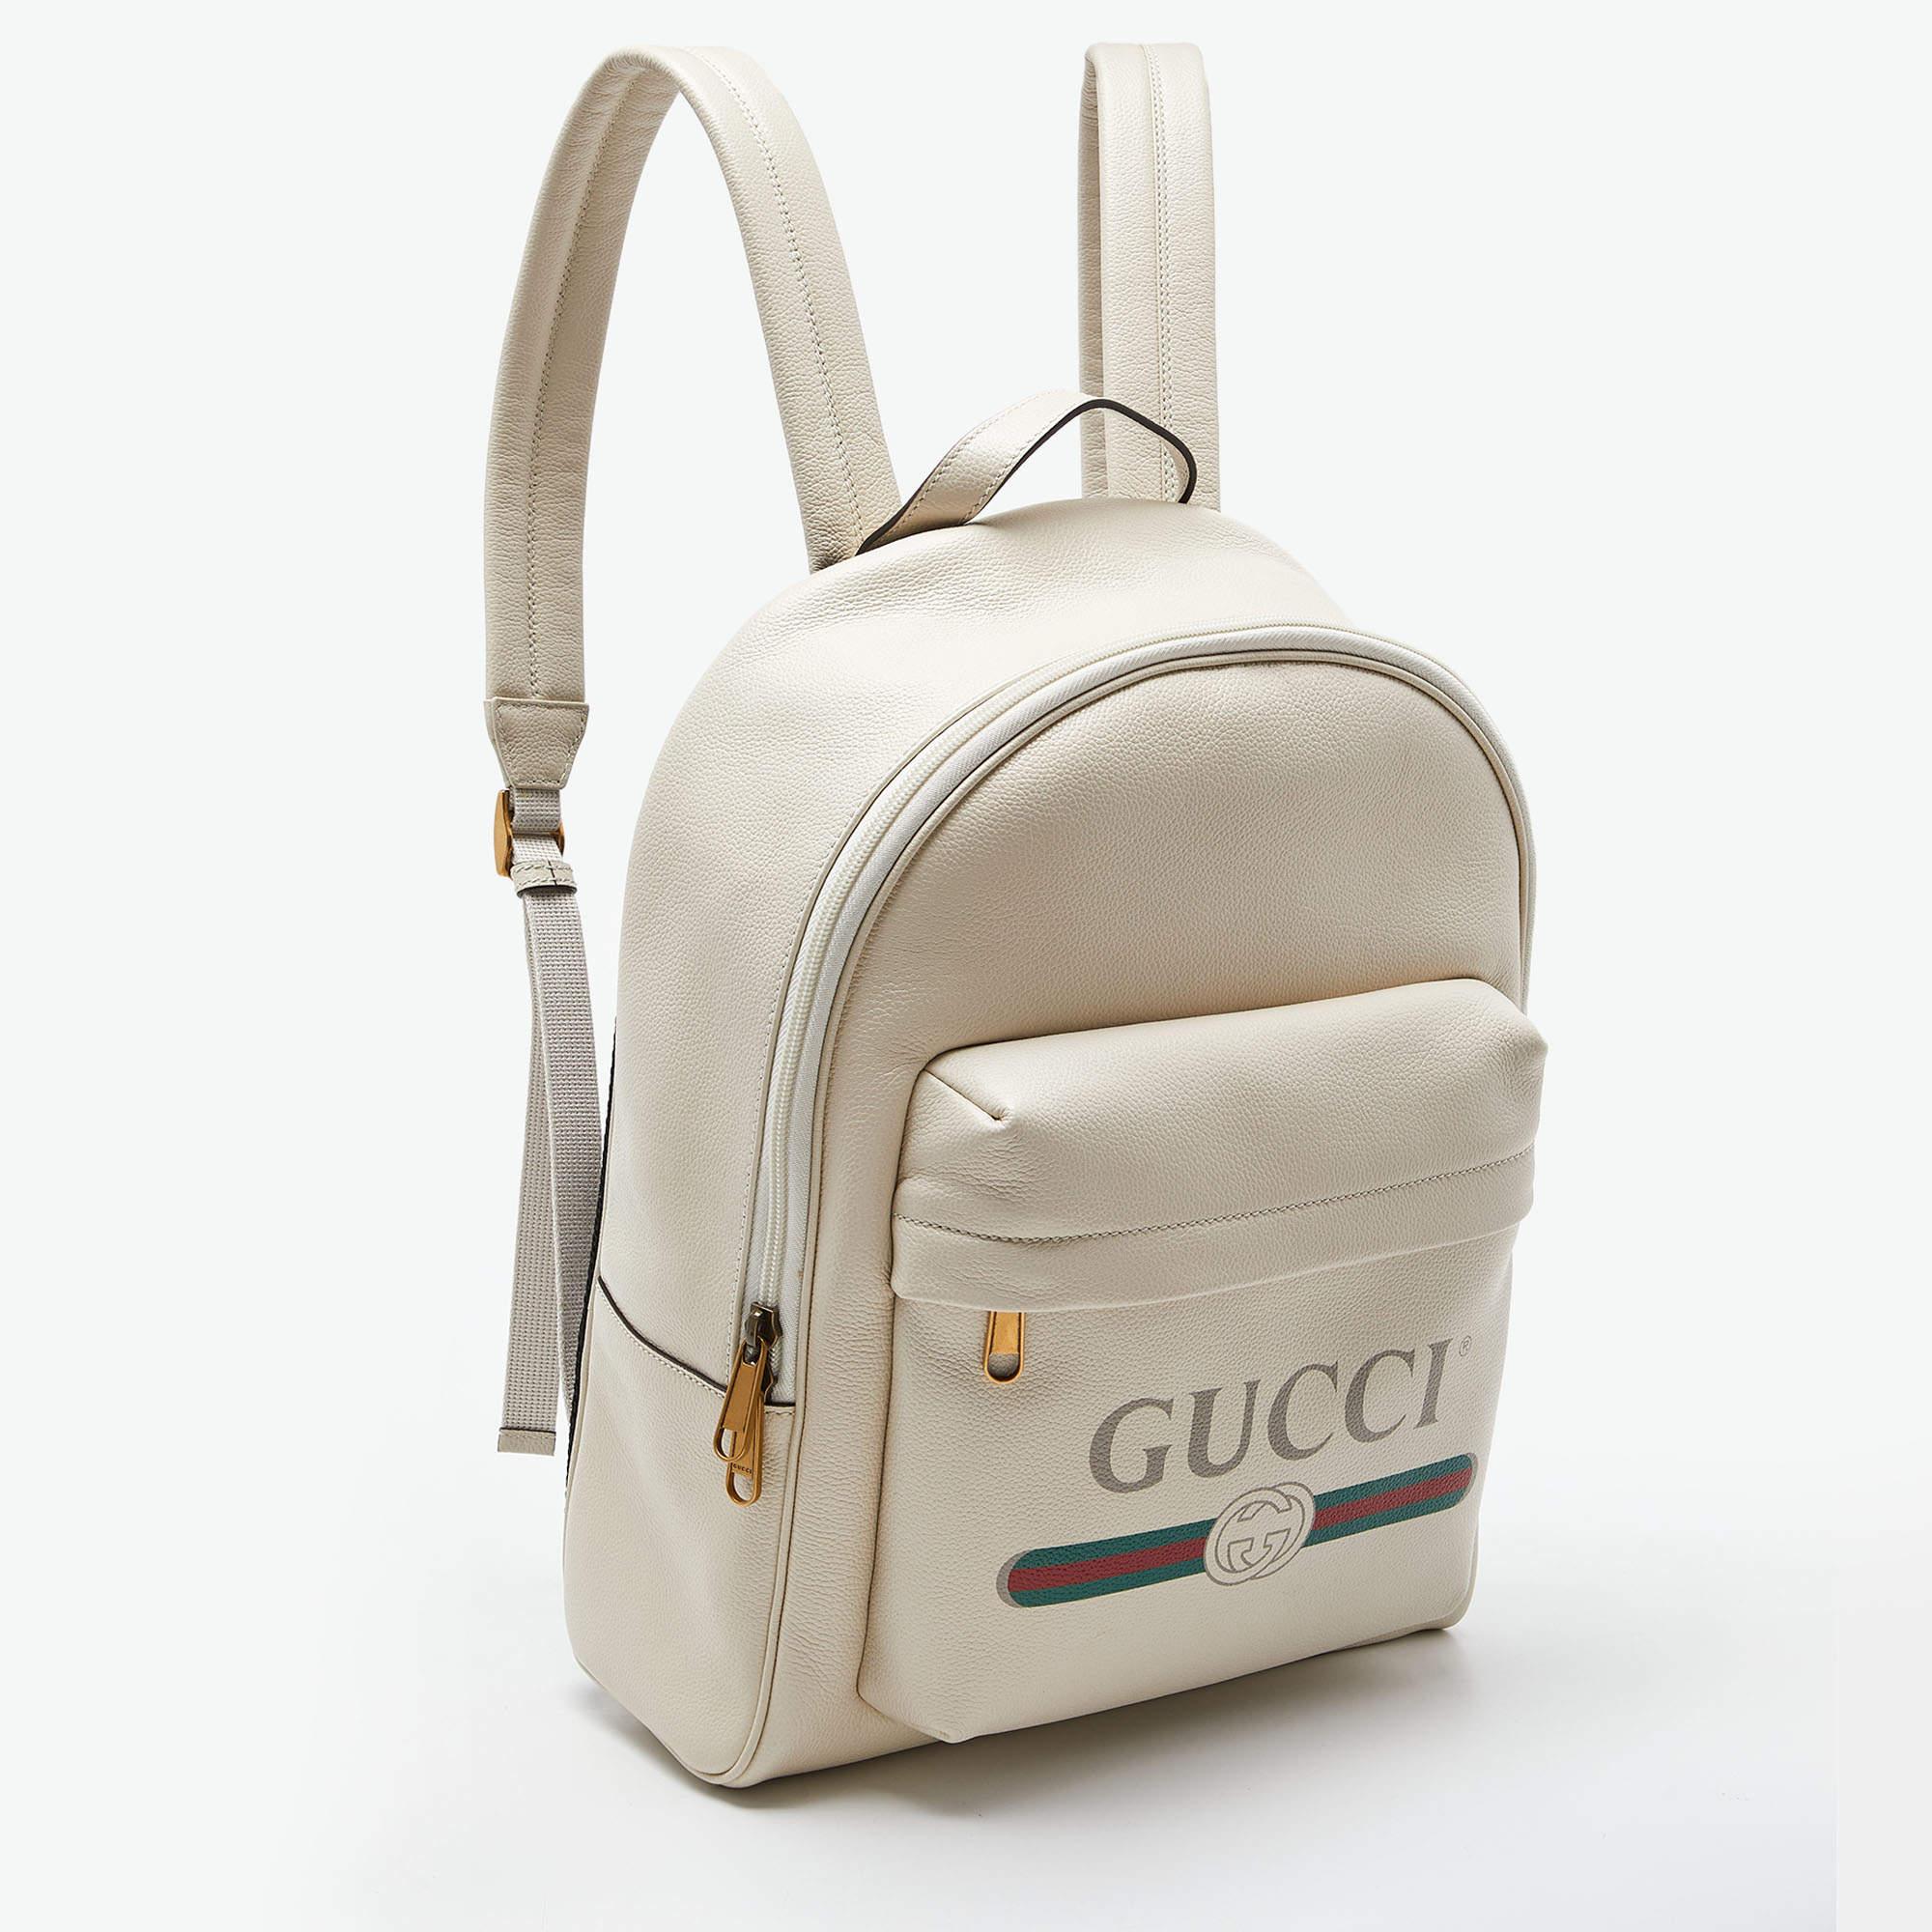 High functional and stylish, add a touch of luxury with this Gucci backpack. Crafted from leather in an cream hue, it features a front pocket accented with a vintage Gucci logo. The zipper closure opens to a spacious interior that makes it ideal for